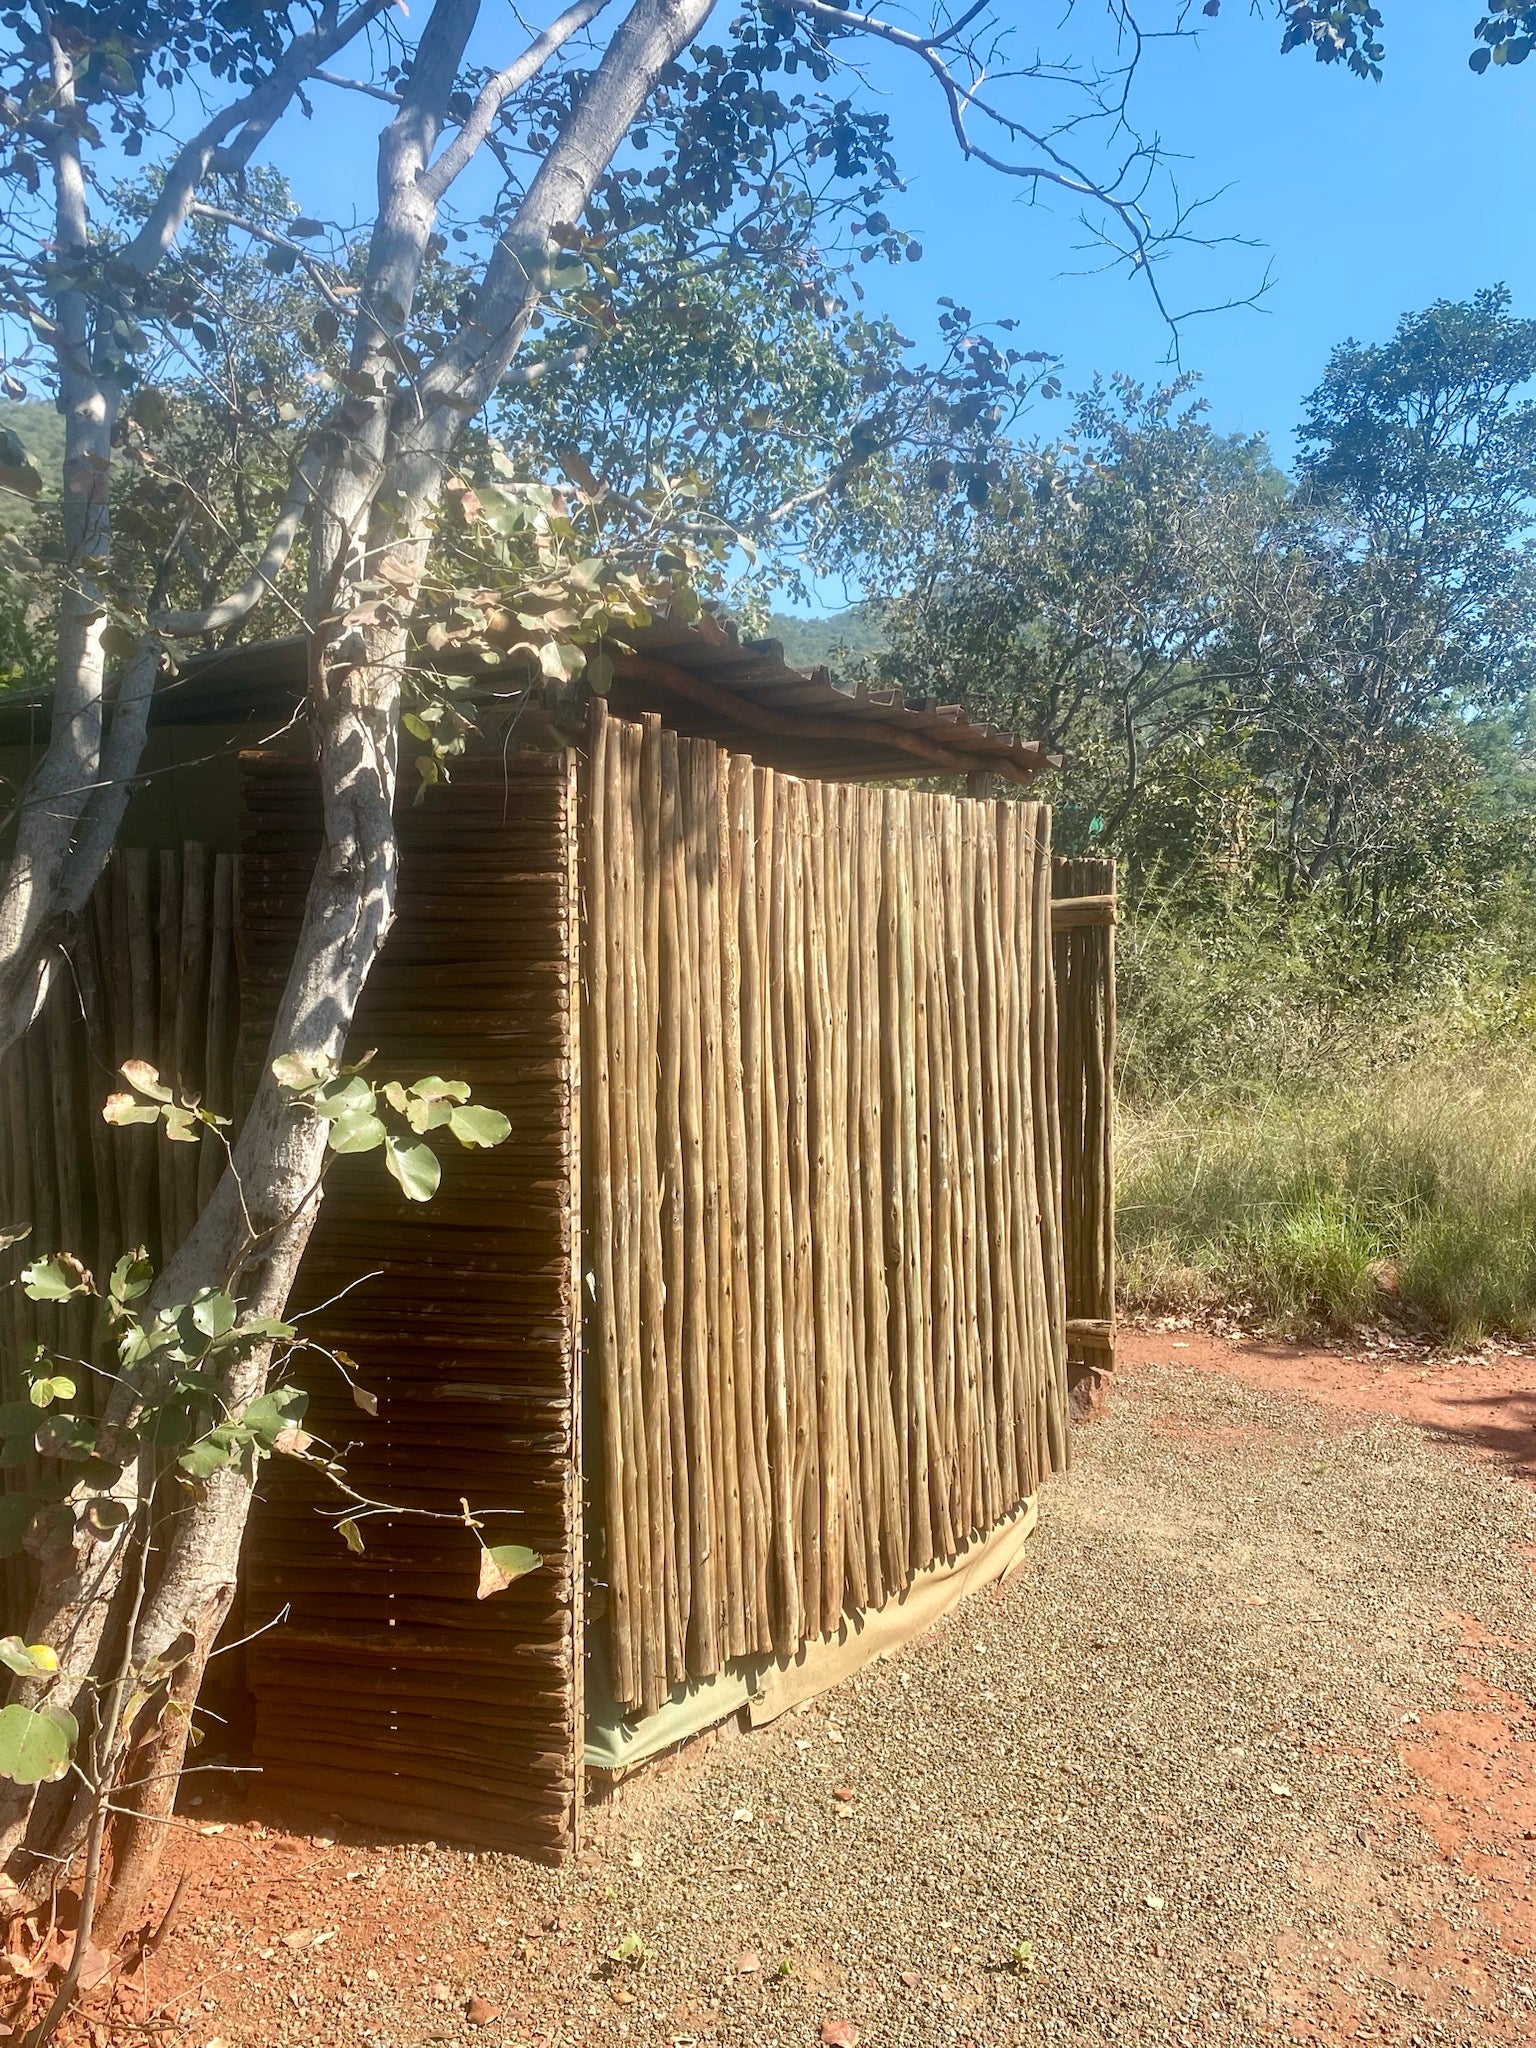 Grootfontein Private Nature Reserve Thabazimbi Limpopo Province South Africa Complementary Colors, Cabin, Building, Architecture, Cactus, Plant, Nature